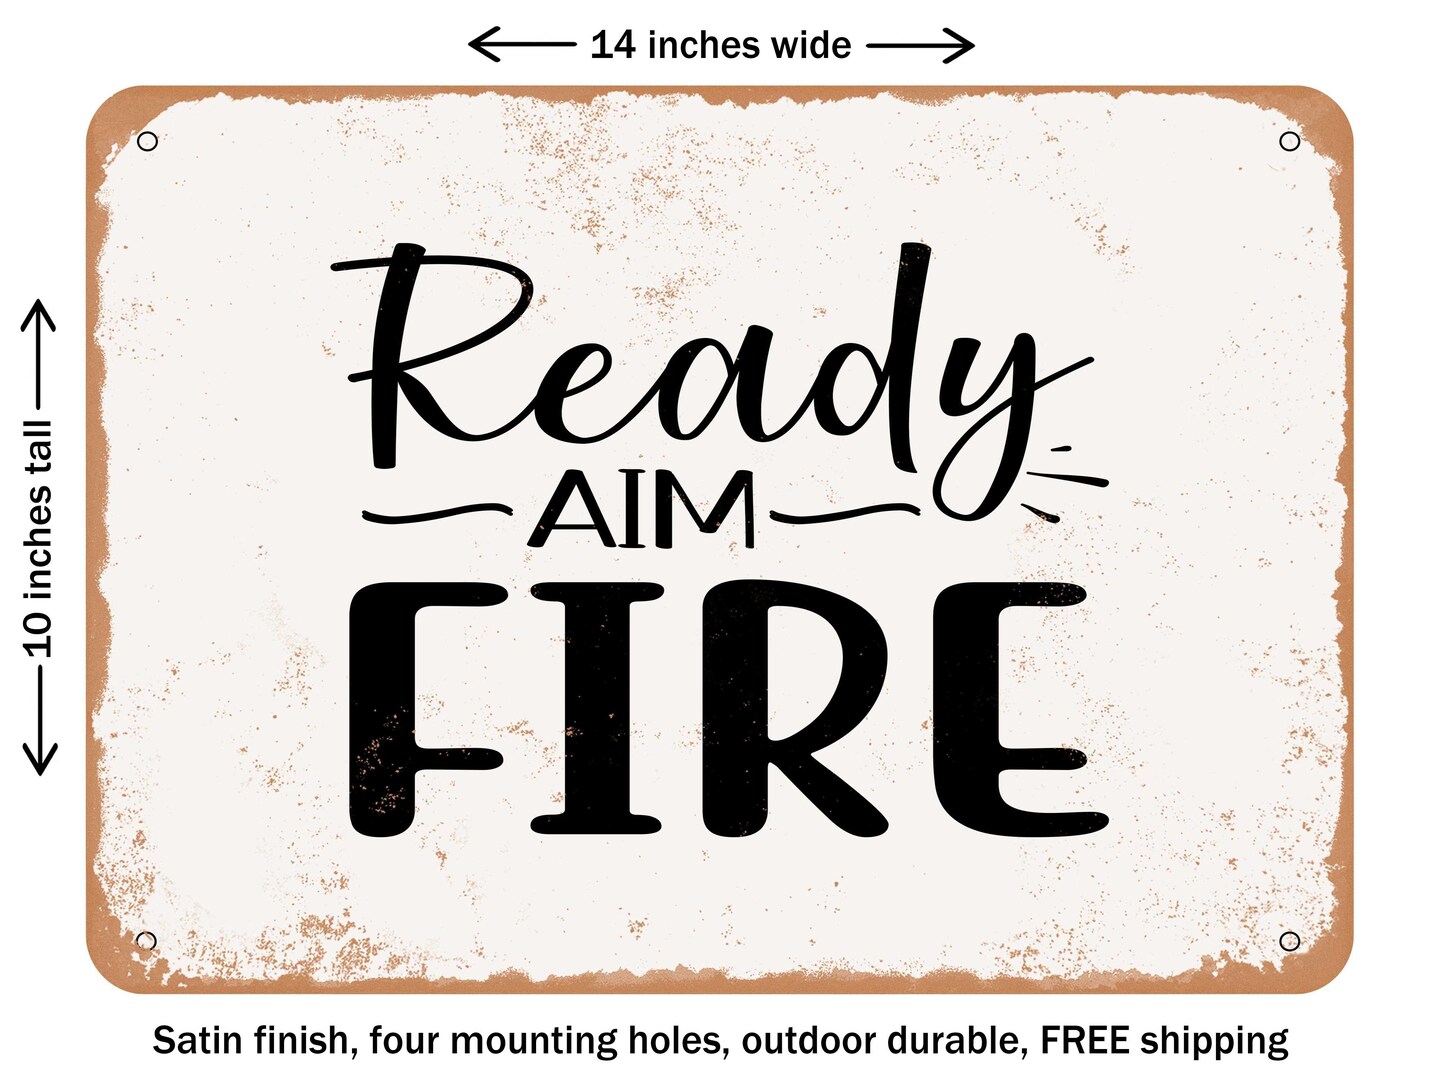 DECORATIVE METAL SIGN - Ready Aim Fire - Vintage Rusty Look